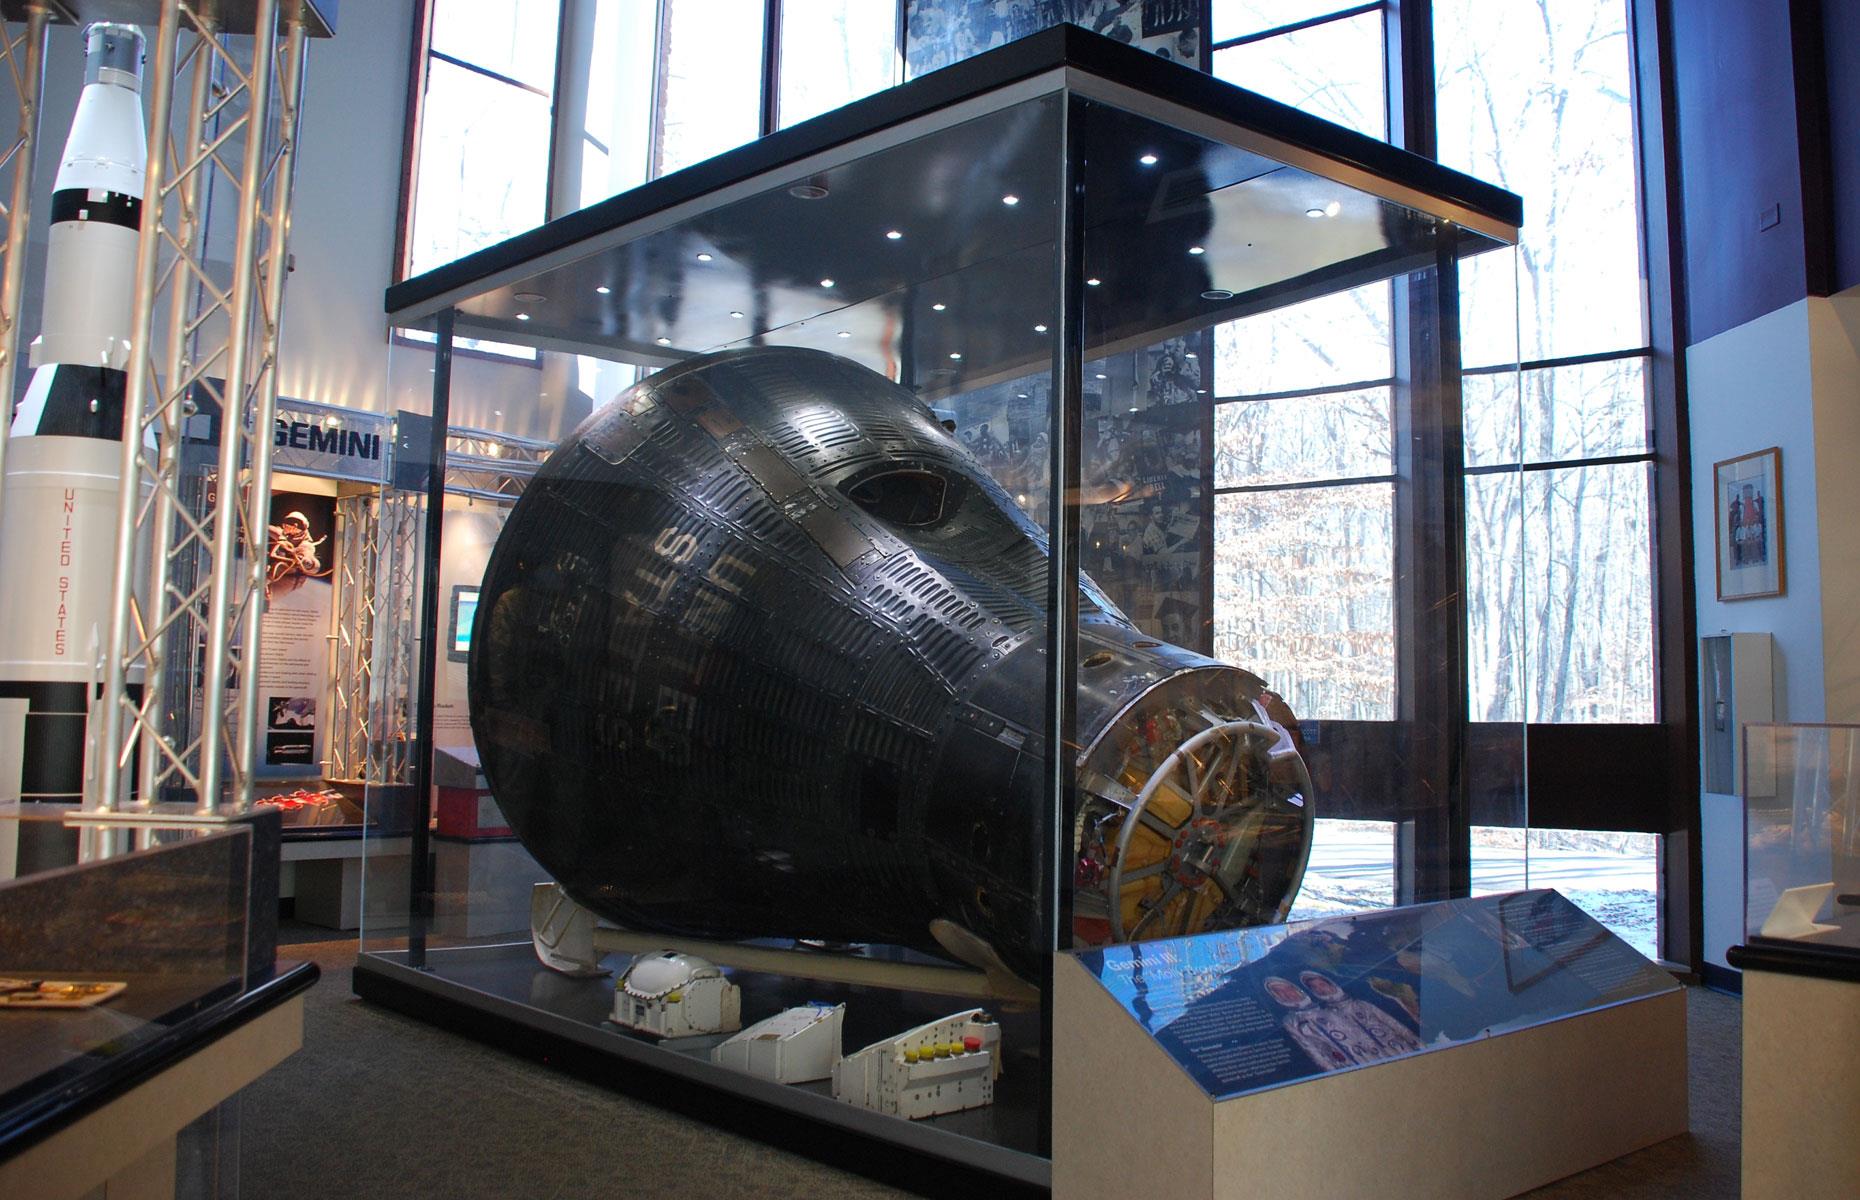 Gemini 3: Grissom Memorial Museum in Mitchell, USA, Earth